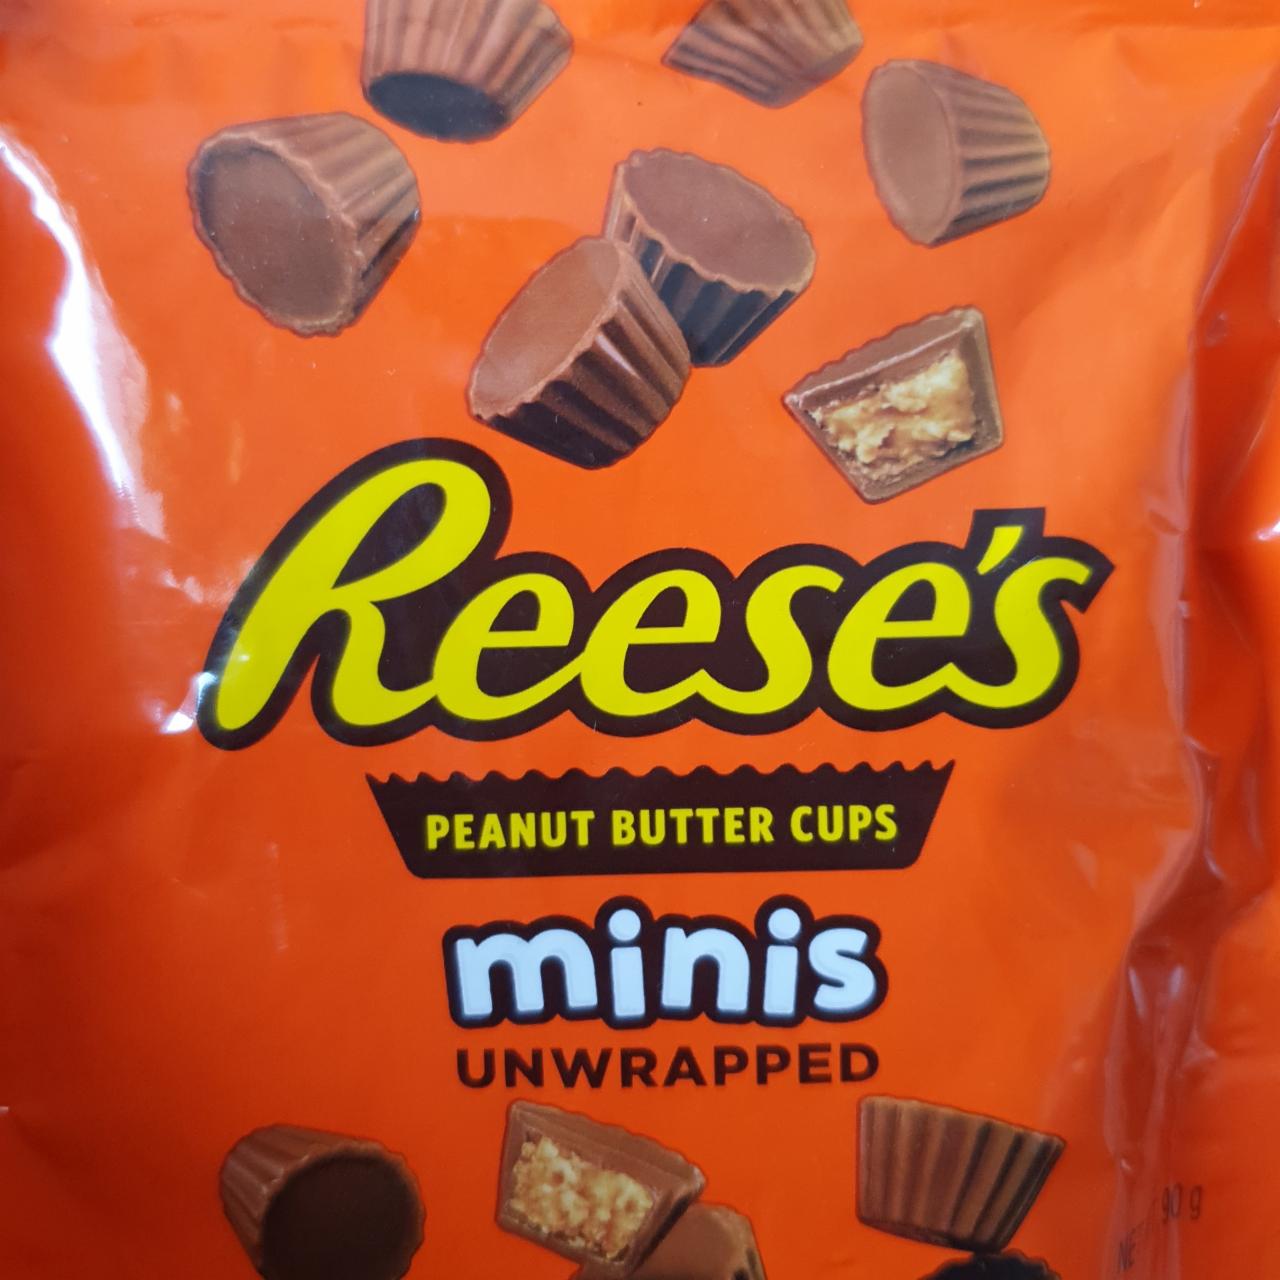 Fotografie - Peanut Butter Cups minis unwrapped Reese's